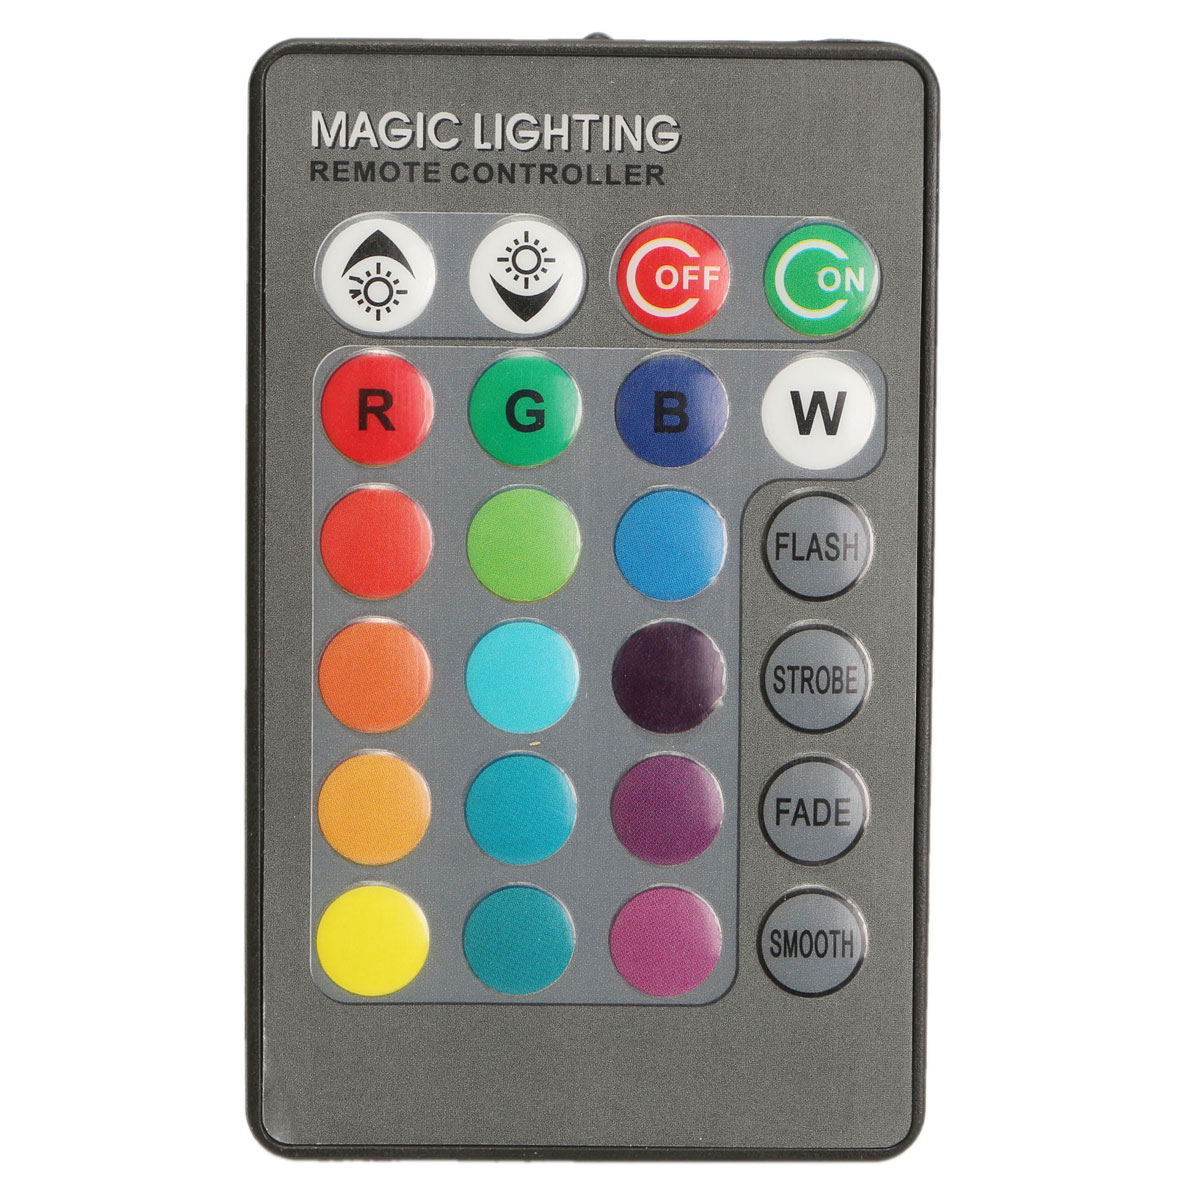 Dimmable-RGB-Color-Changing-4W-B22-LED-Light-Bulb-Bayonet-with-IR-Remote-Controller-1124255